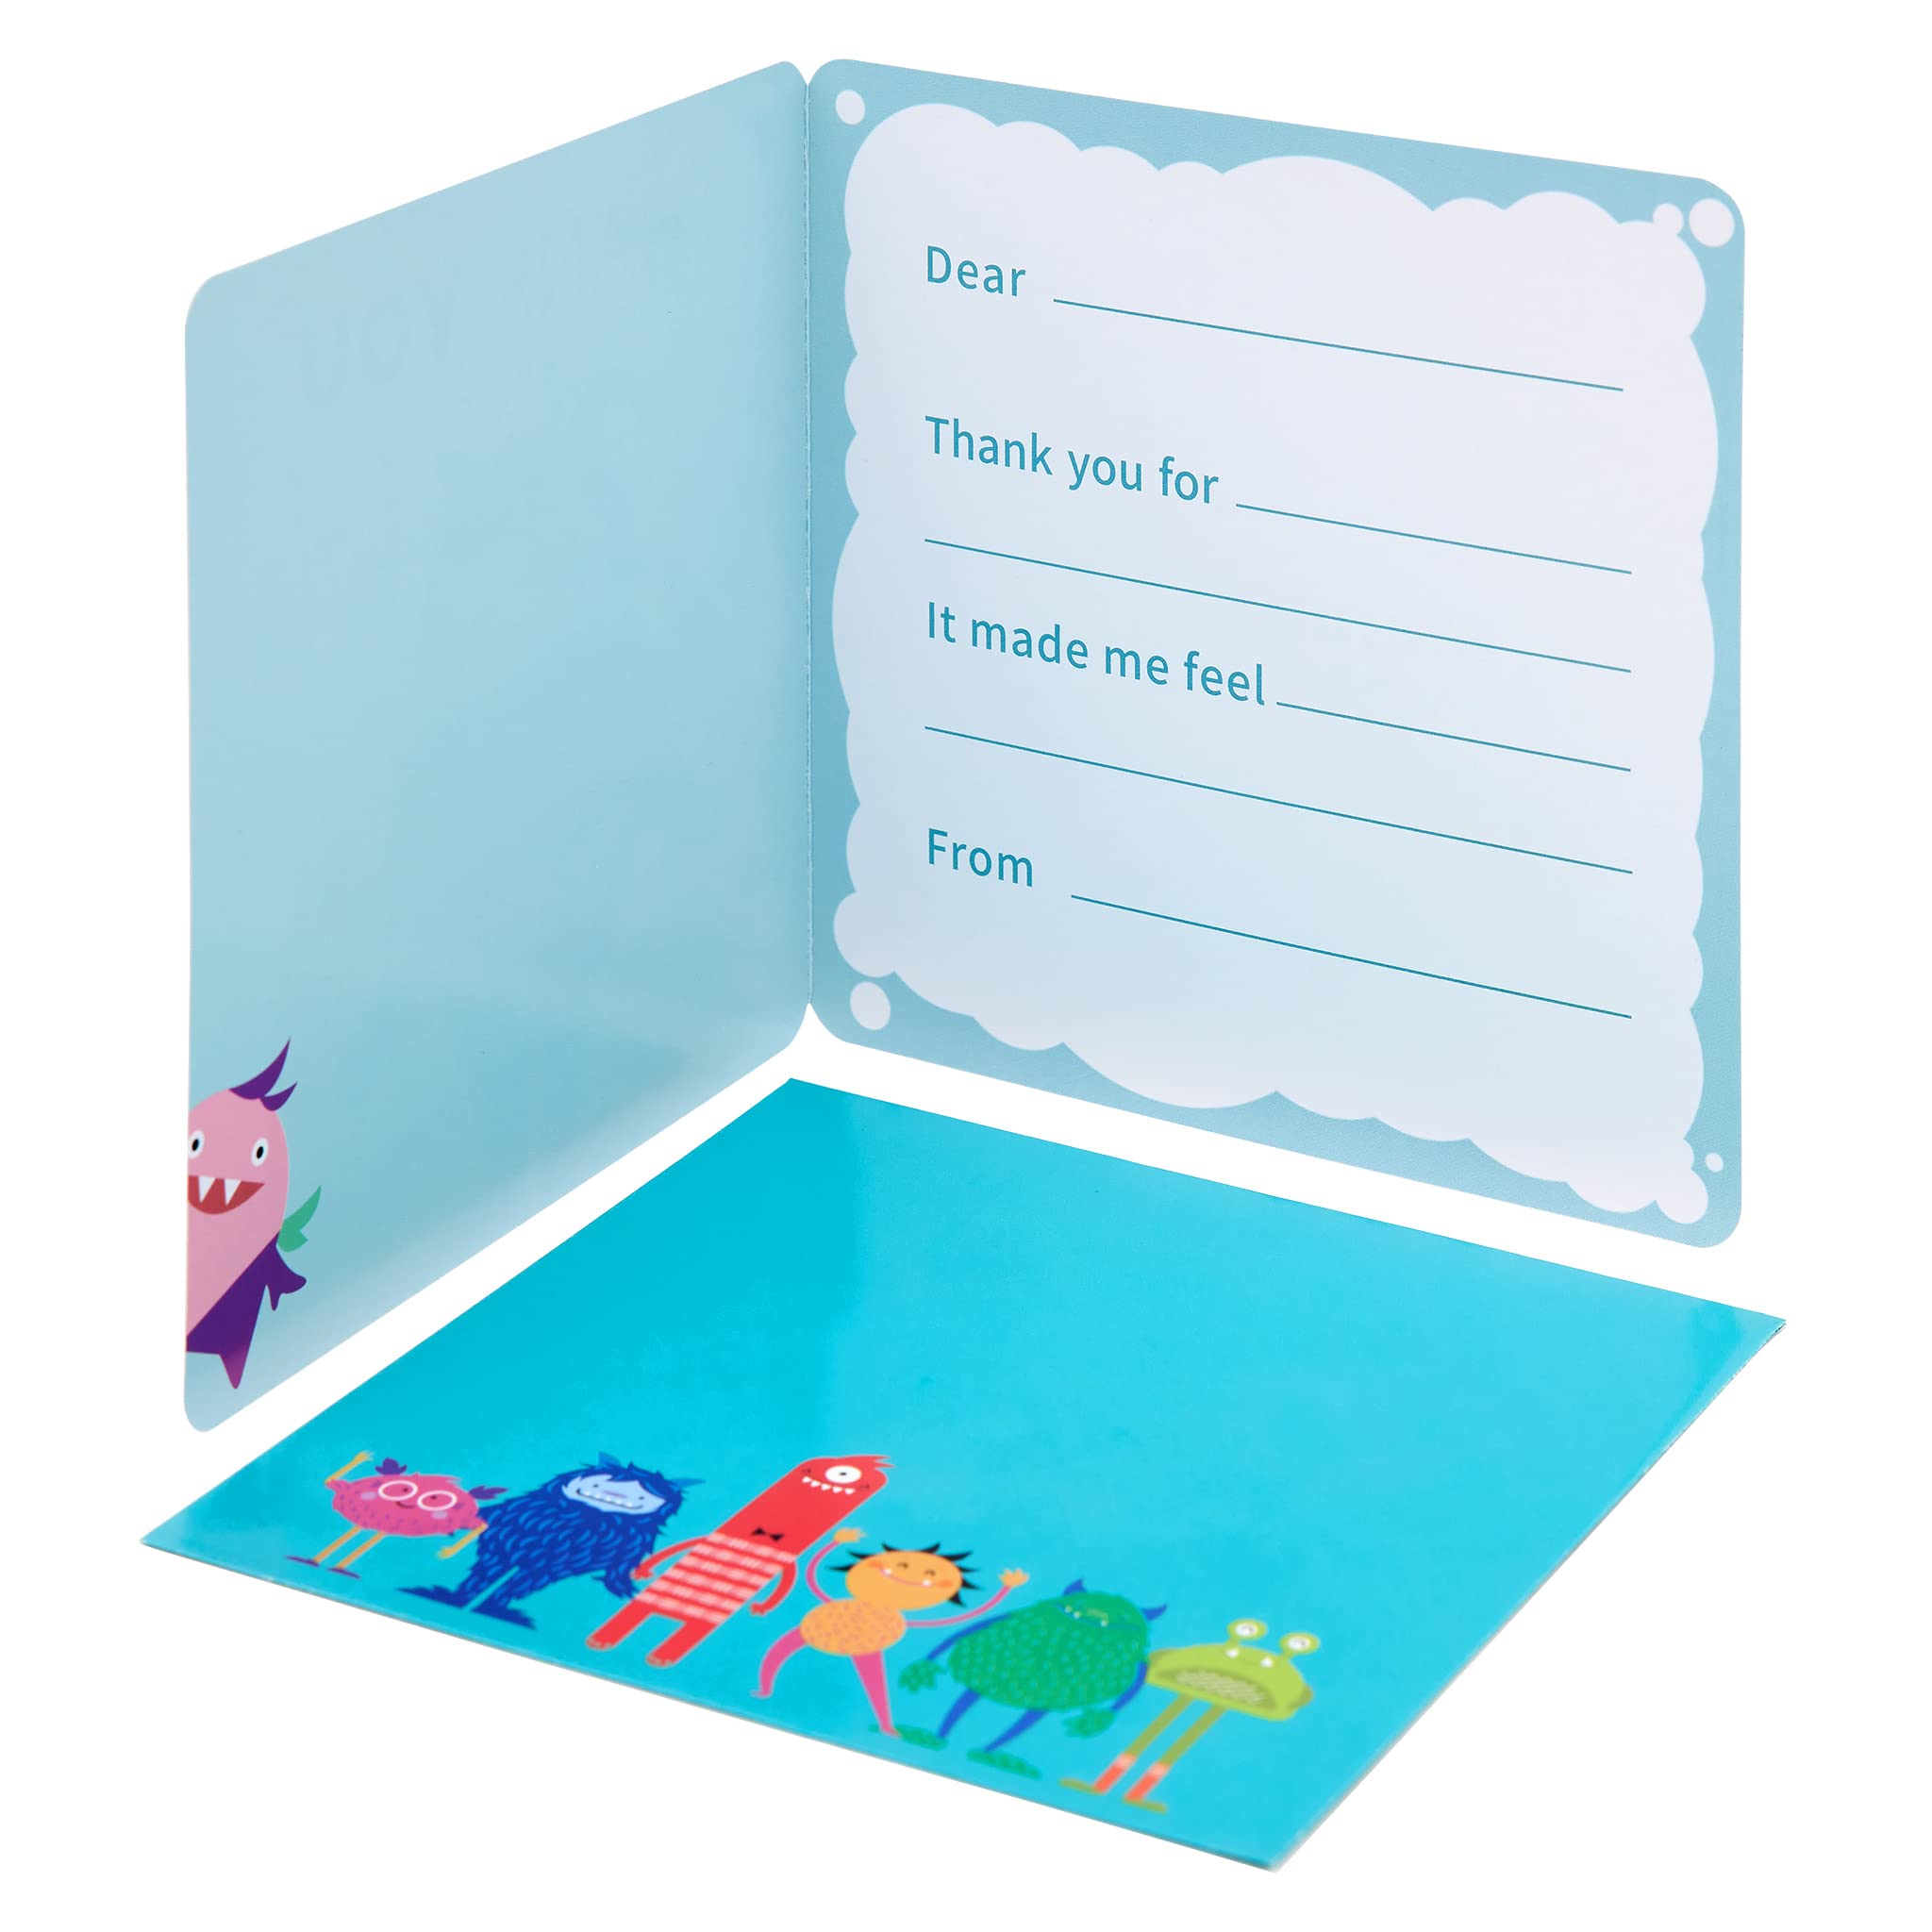 Manners&Co. Kids’ Thank You Cards, Adorable Notes of Gratitude, Thoughtful Fill-In-The-Blank Prompts, Mannered Monsters, 30 Cards & Envelopes